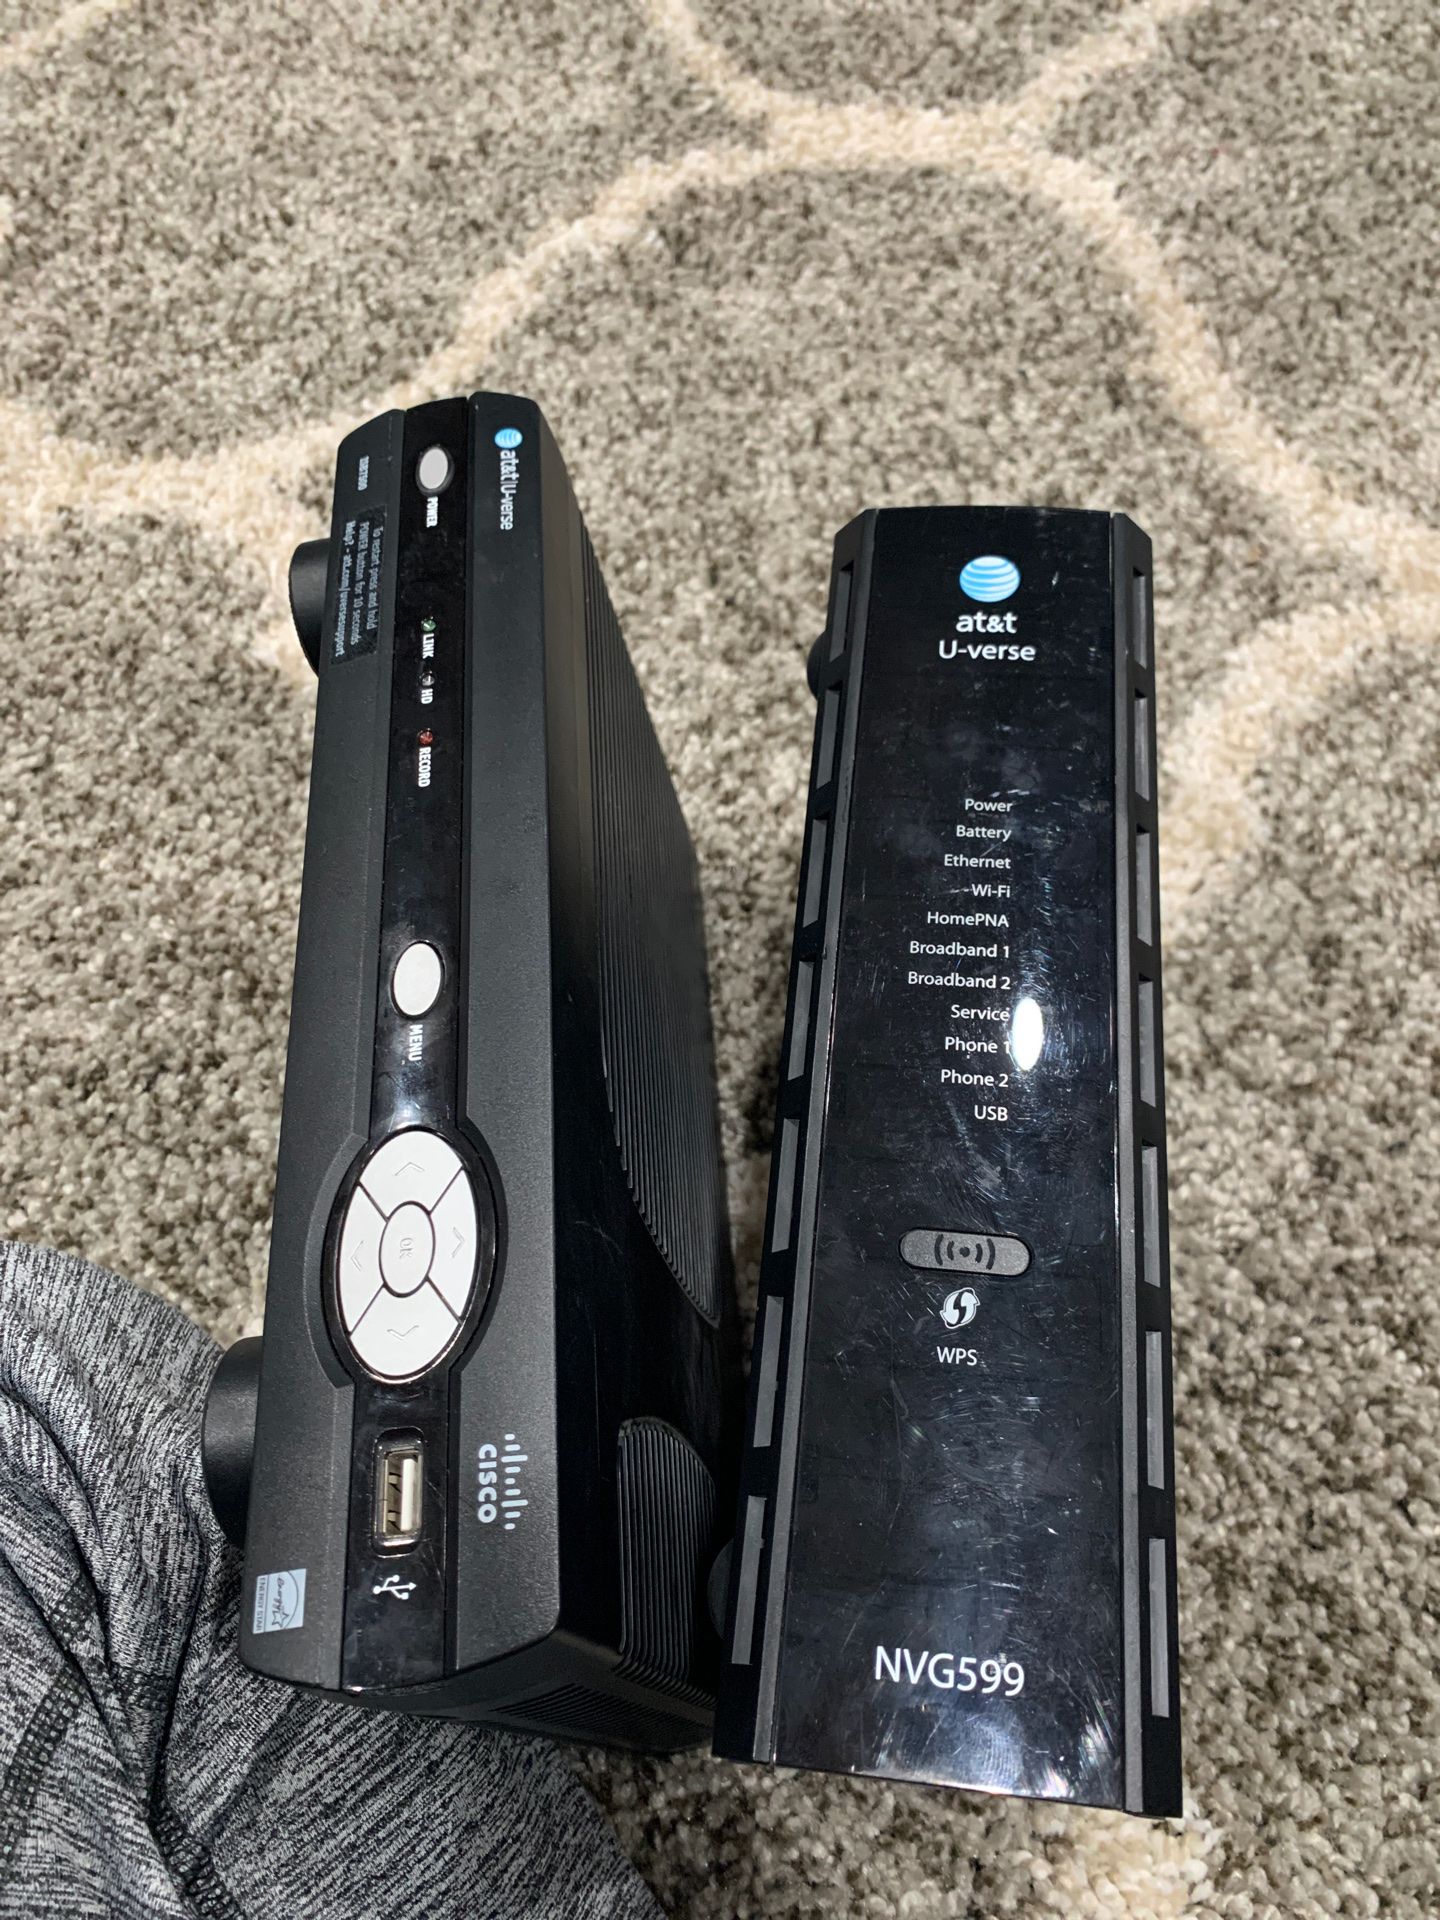 AT&T modems